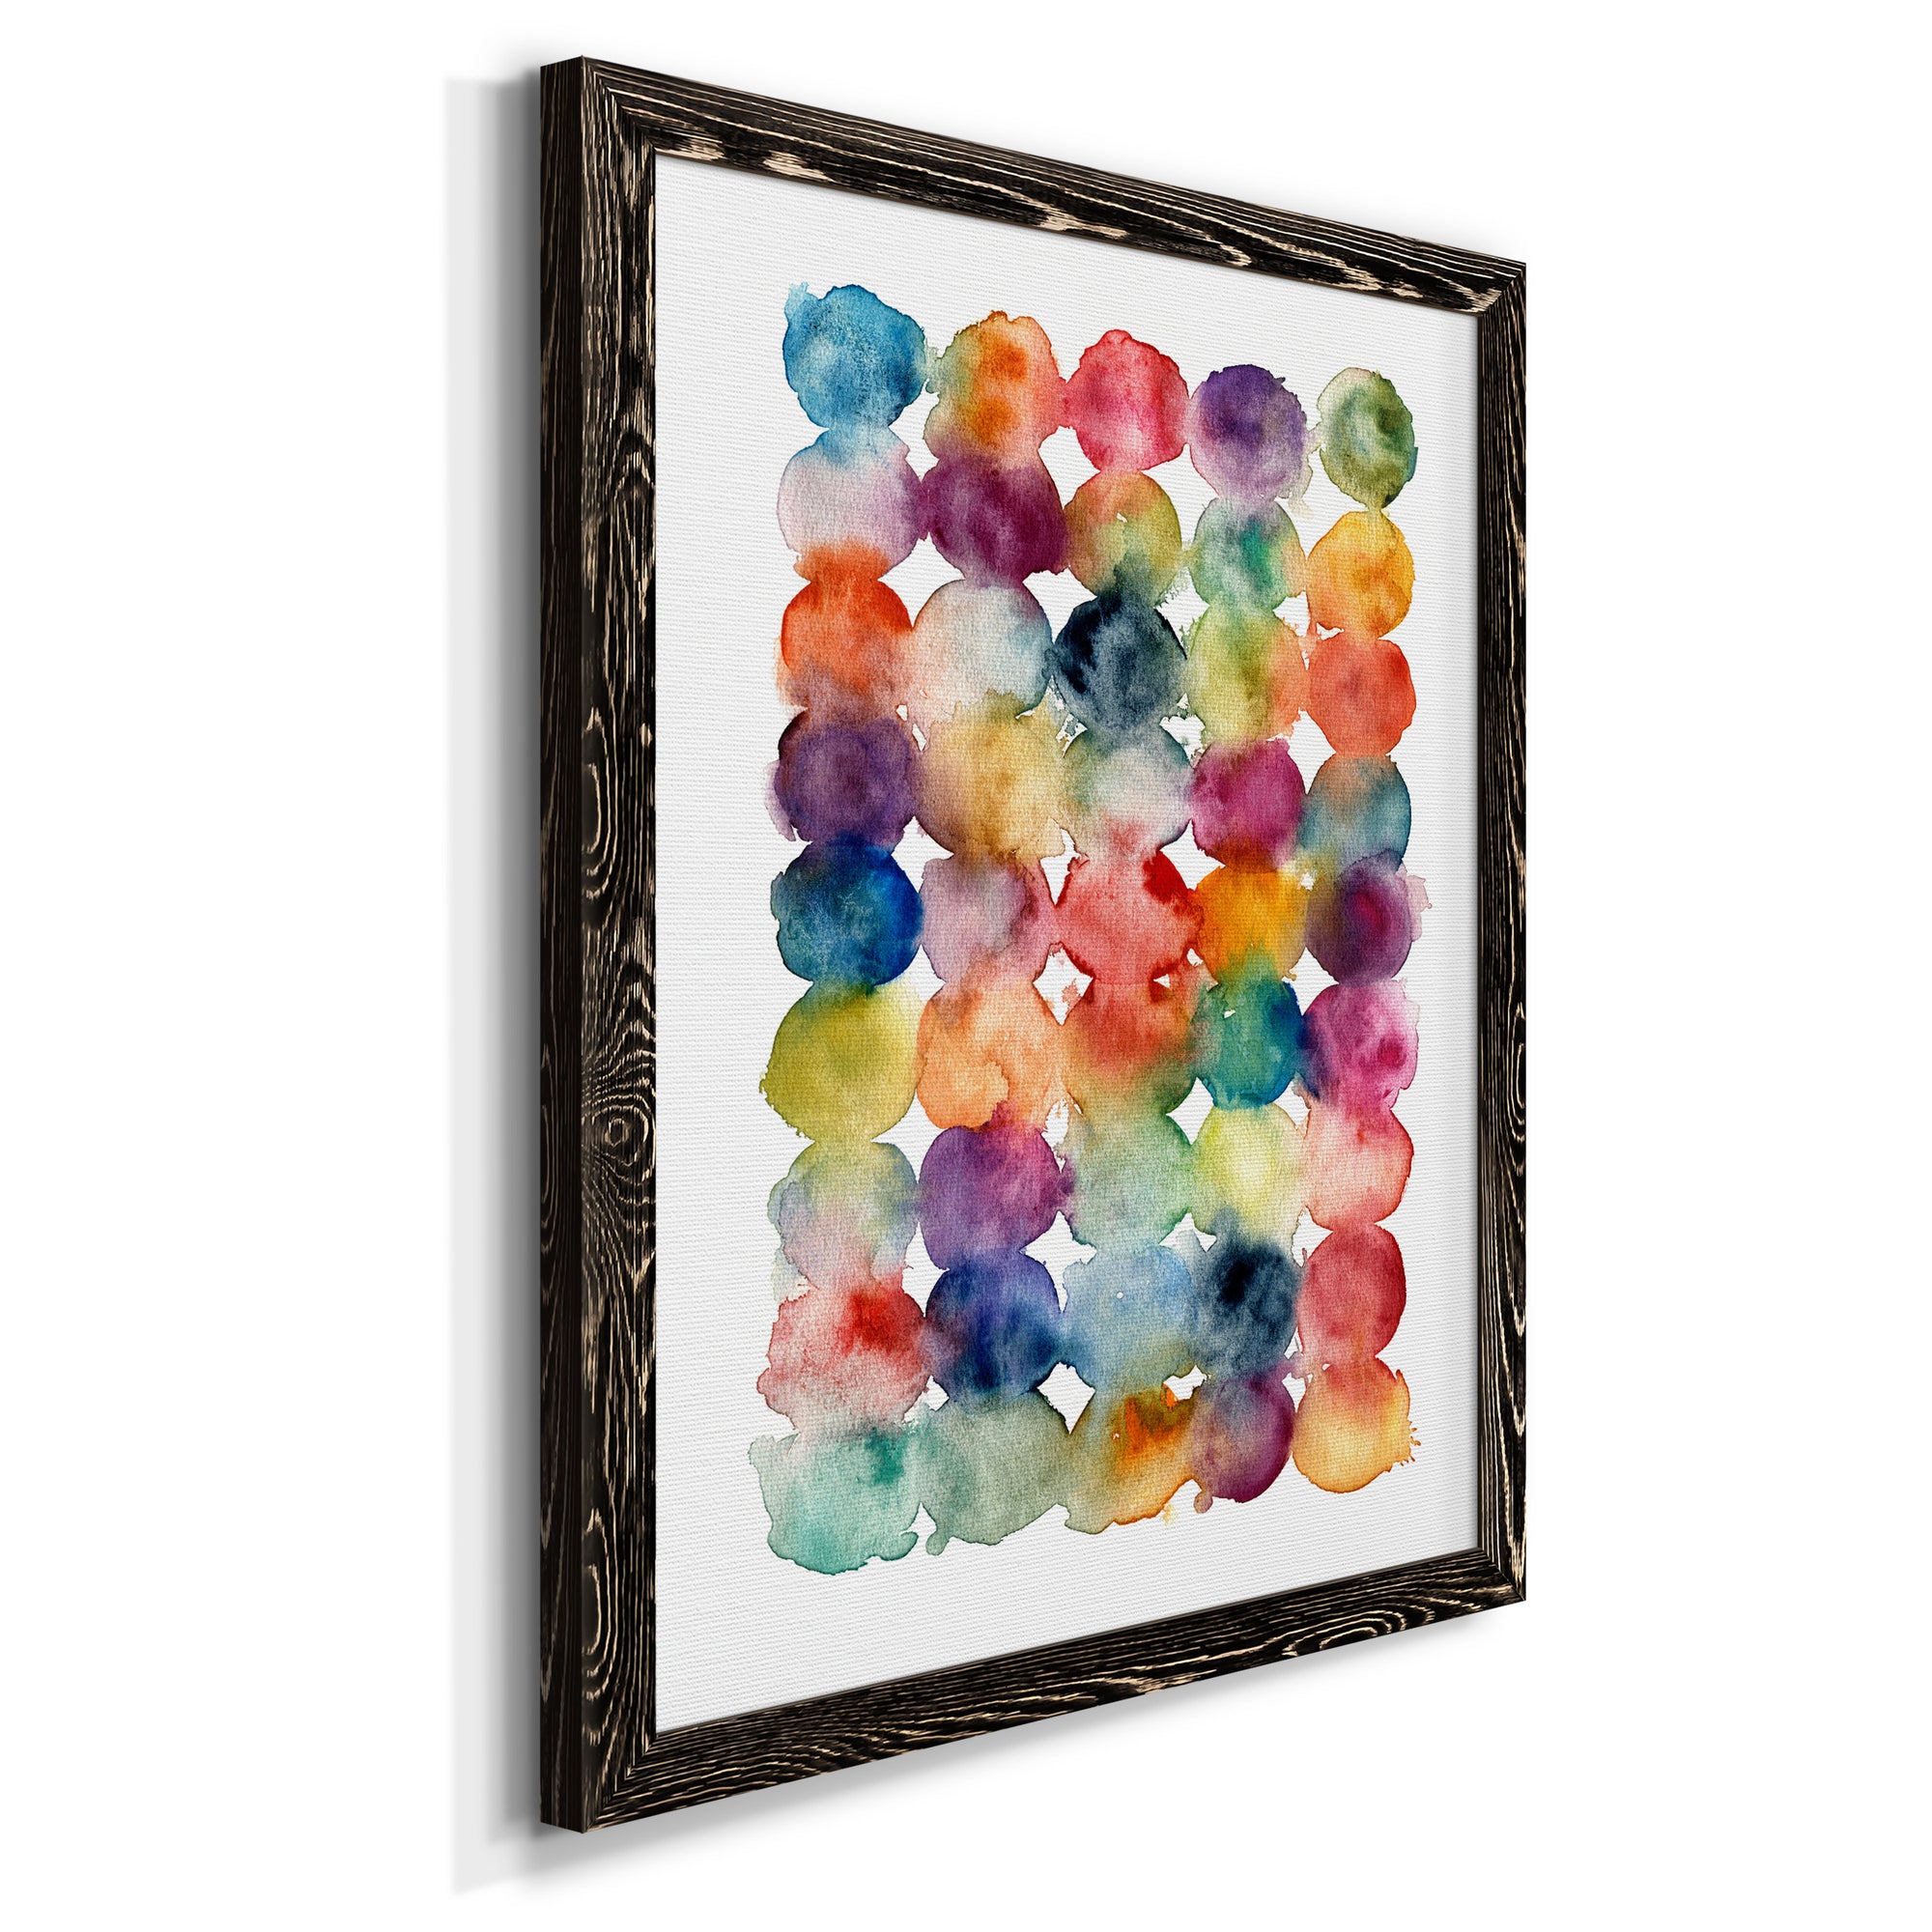 Spectrum Side by Side - Premium Canvas Framed in Barnwood - Ready to Hang